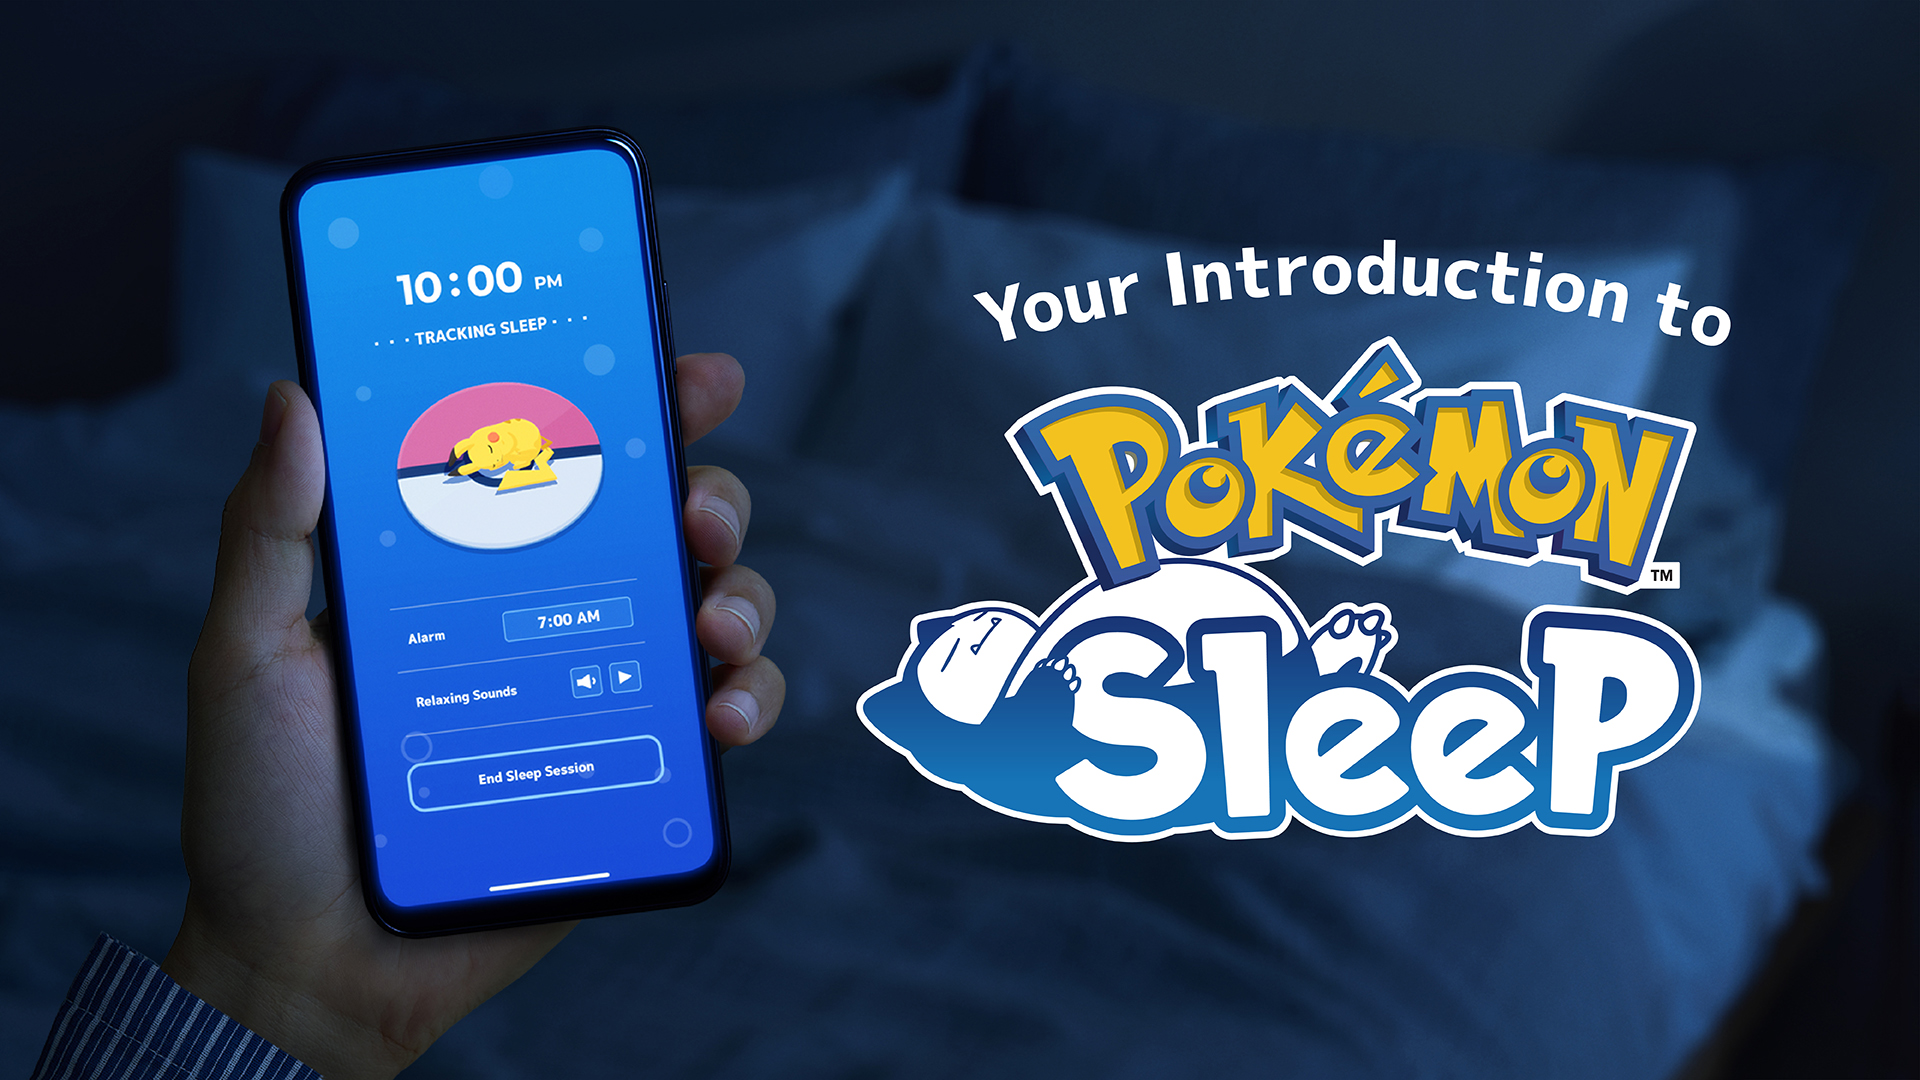 Pokémon Sleep trailer with new details about the gameplay has been released